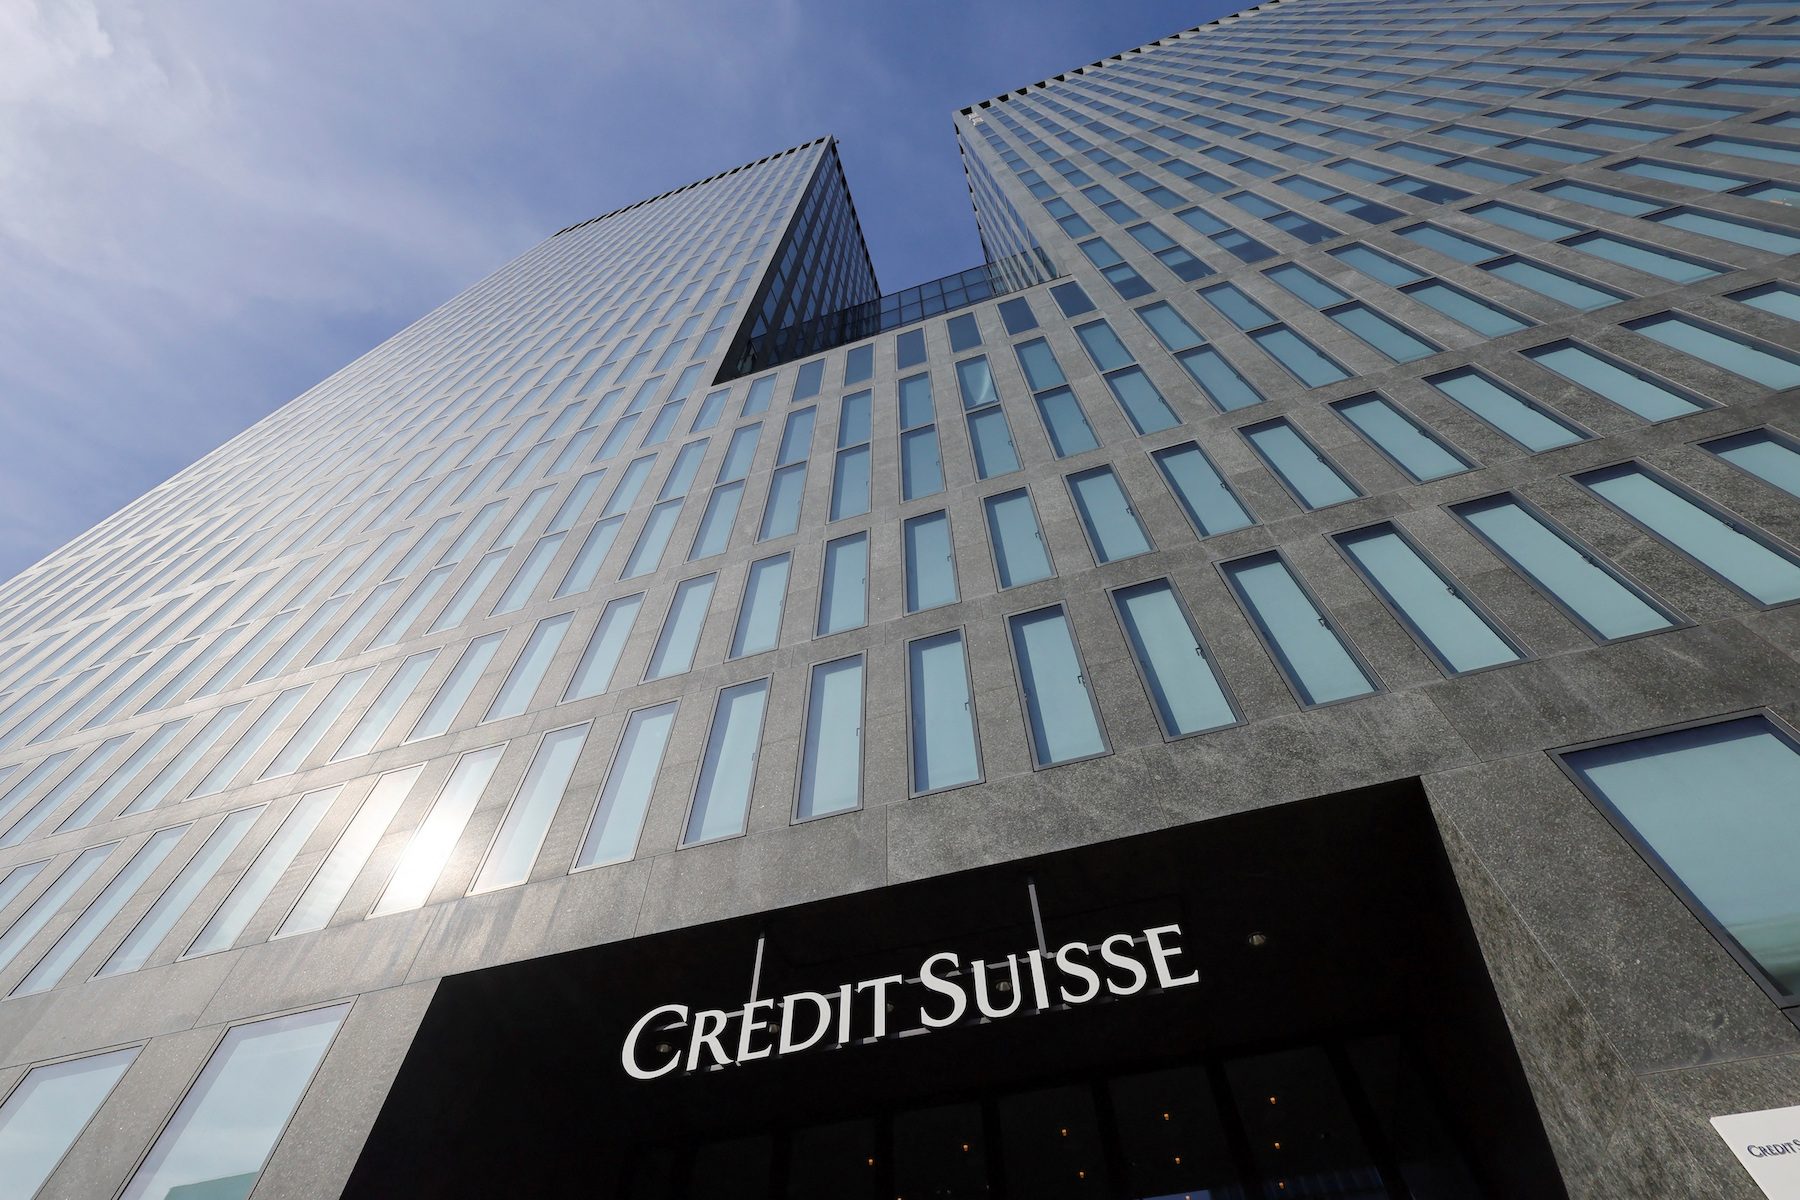 TIMELINE: How Credit Suisse has evolved over 167 years